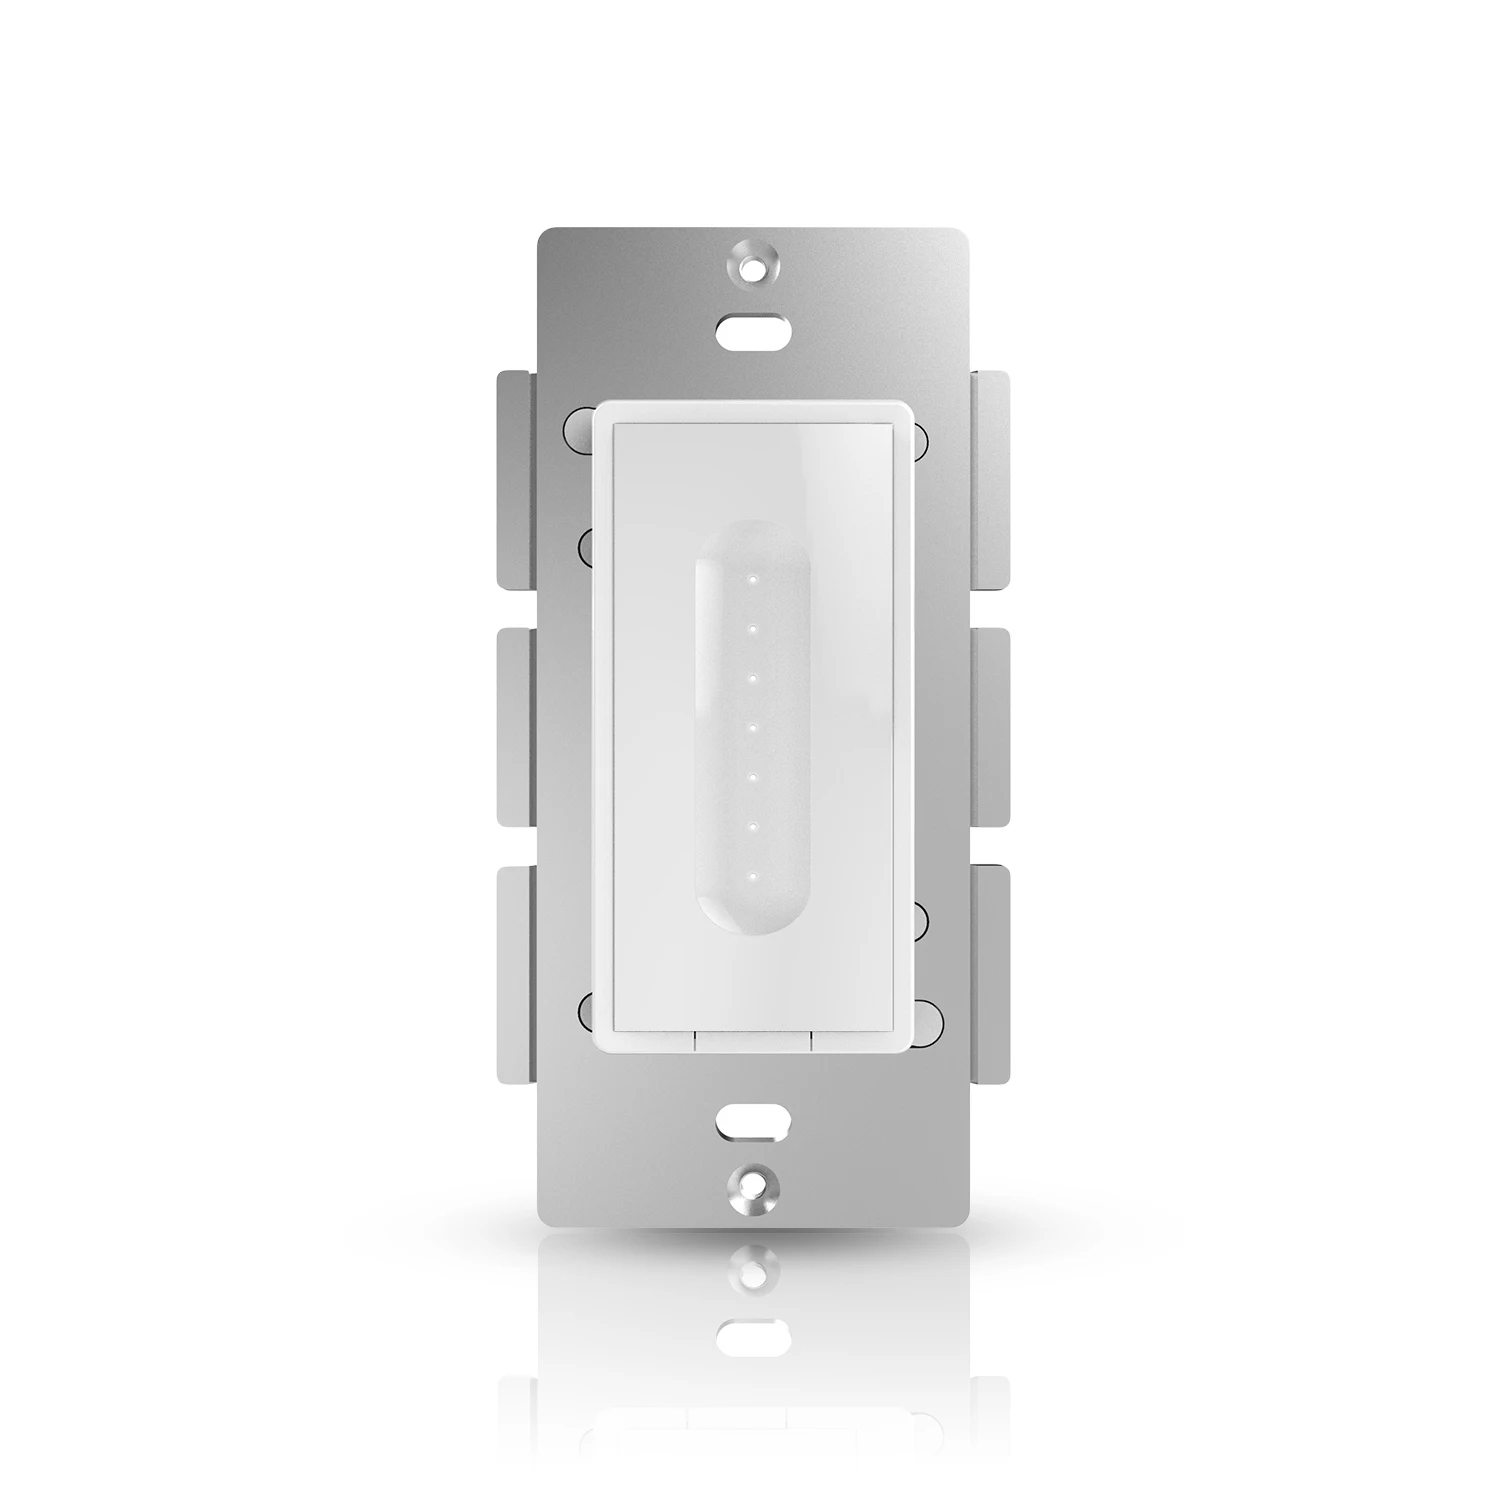 Smart Home Products WF35 Alexa Wifi Tuya App 3 Way Touch Slide Smart Dimmer for US Market Wall Light Switch